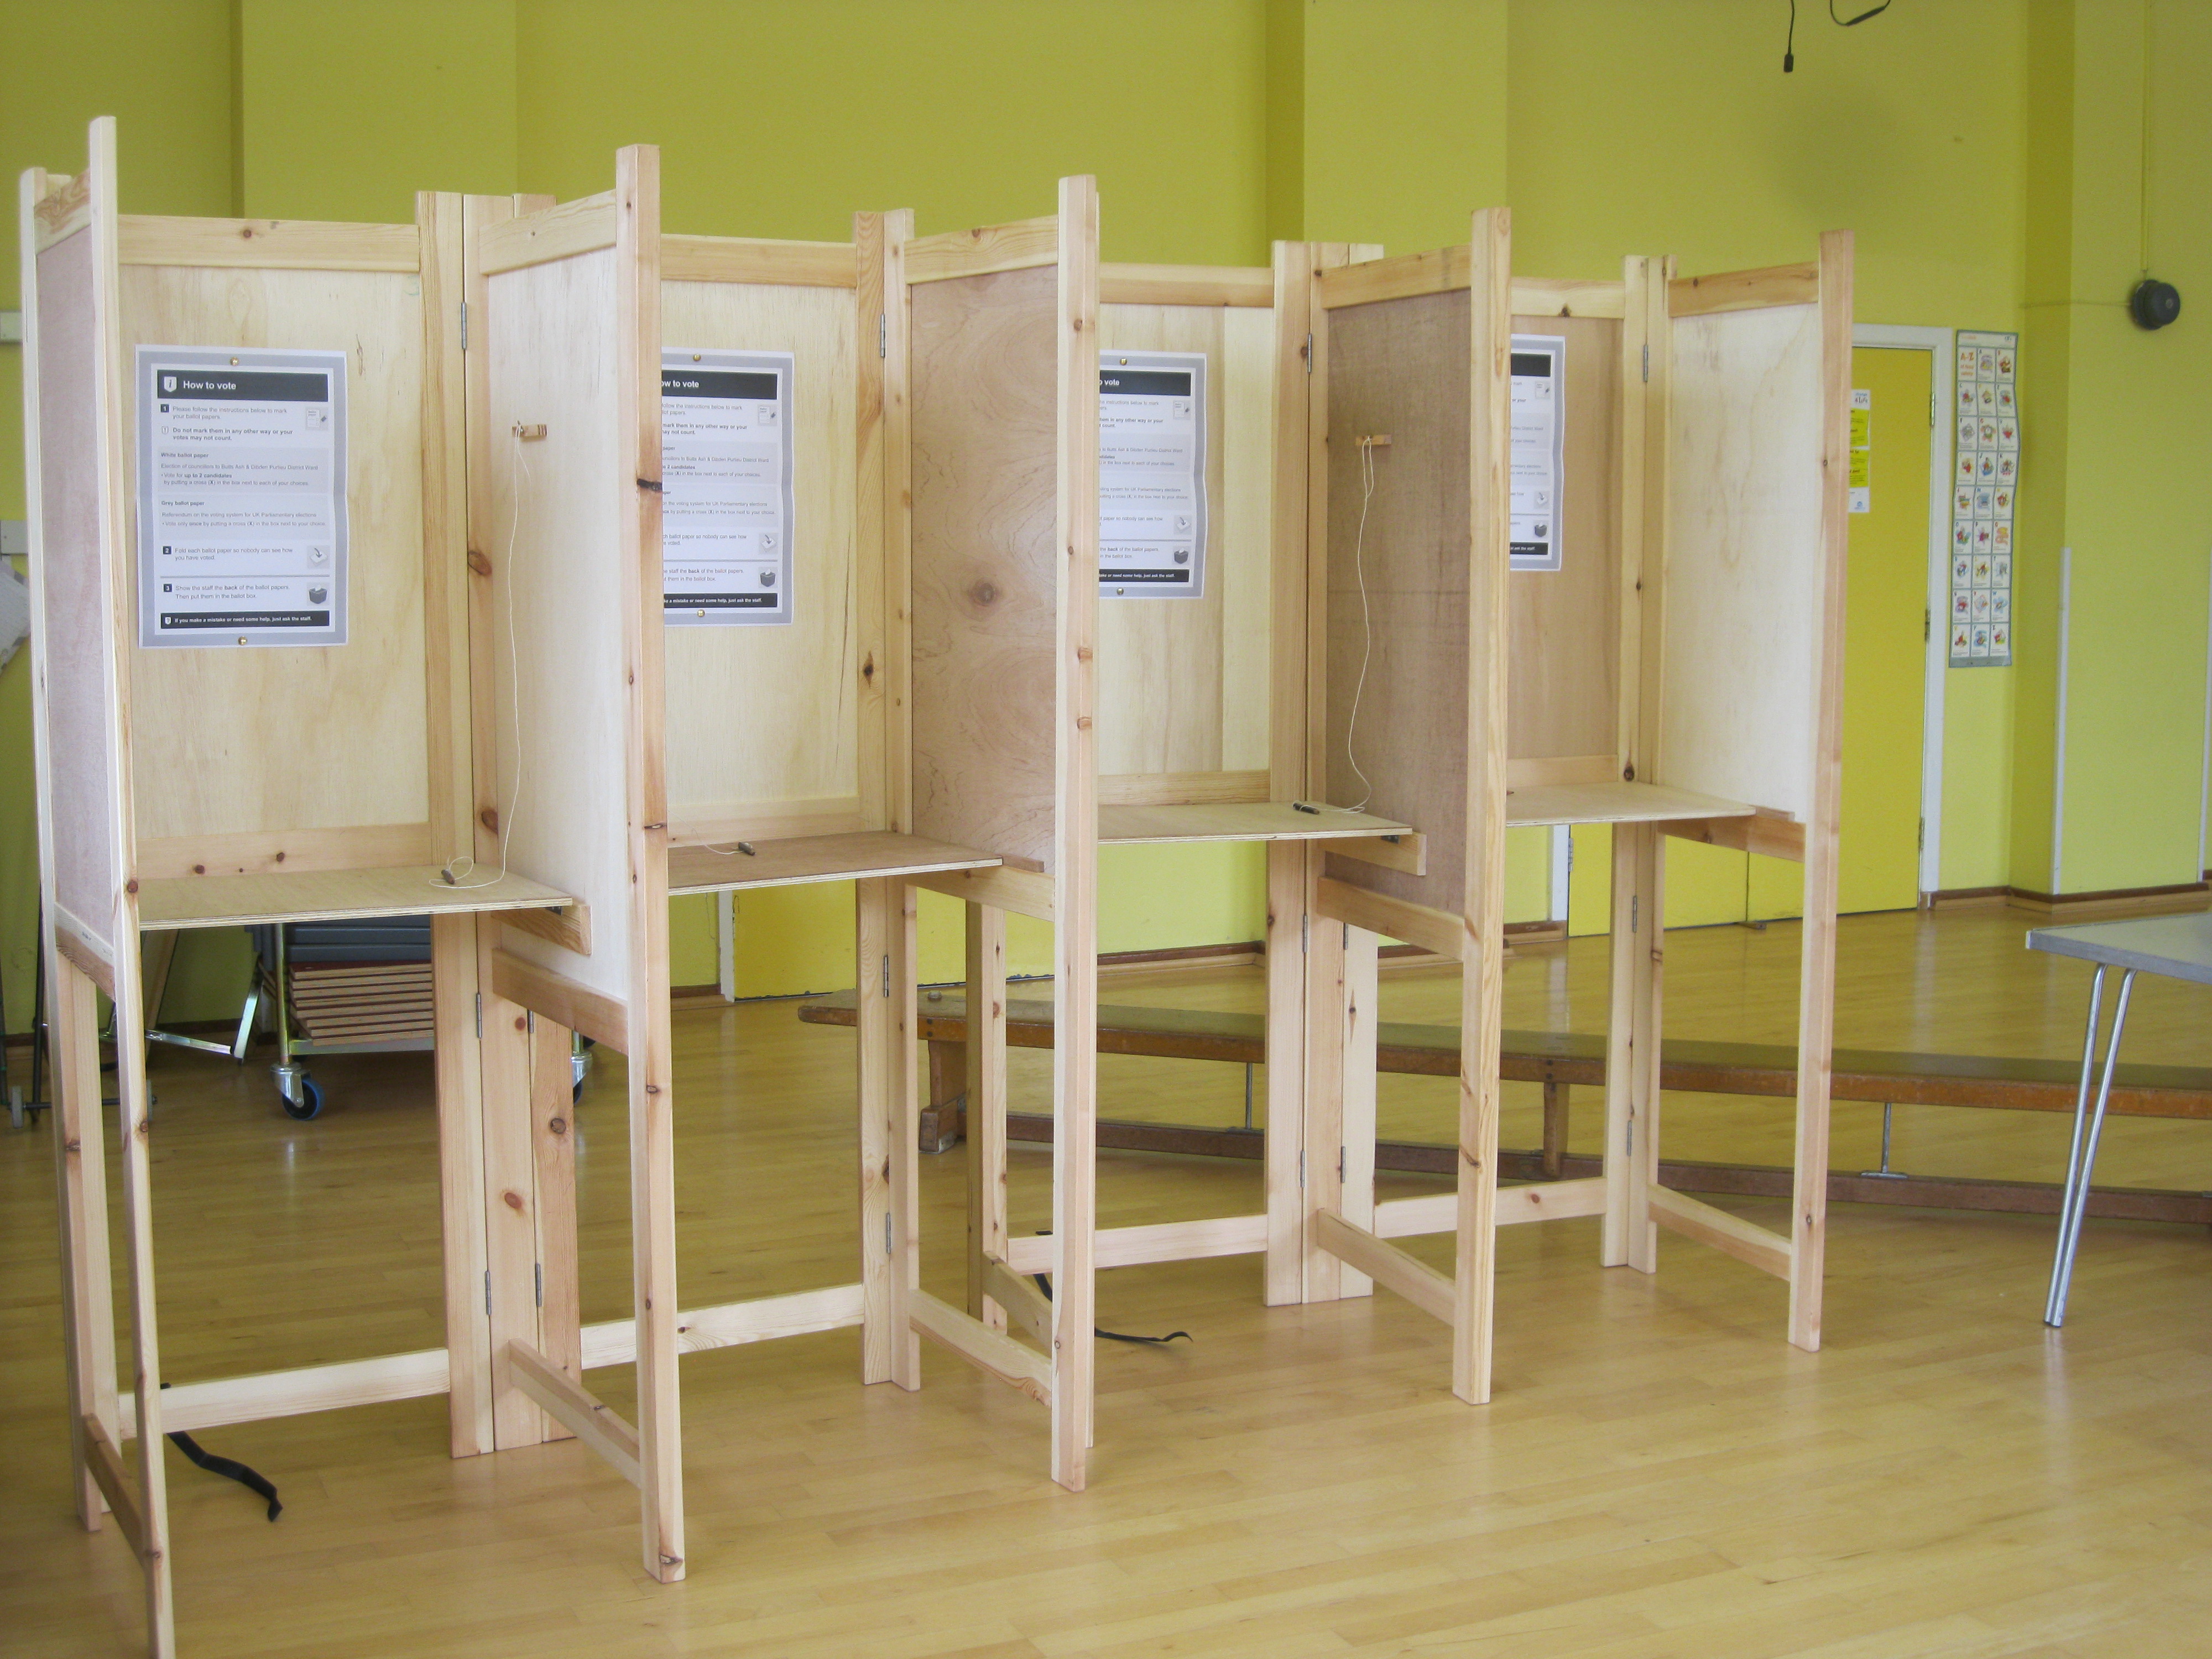 Voting booth or ballot box.